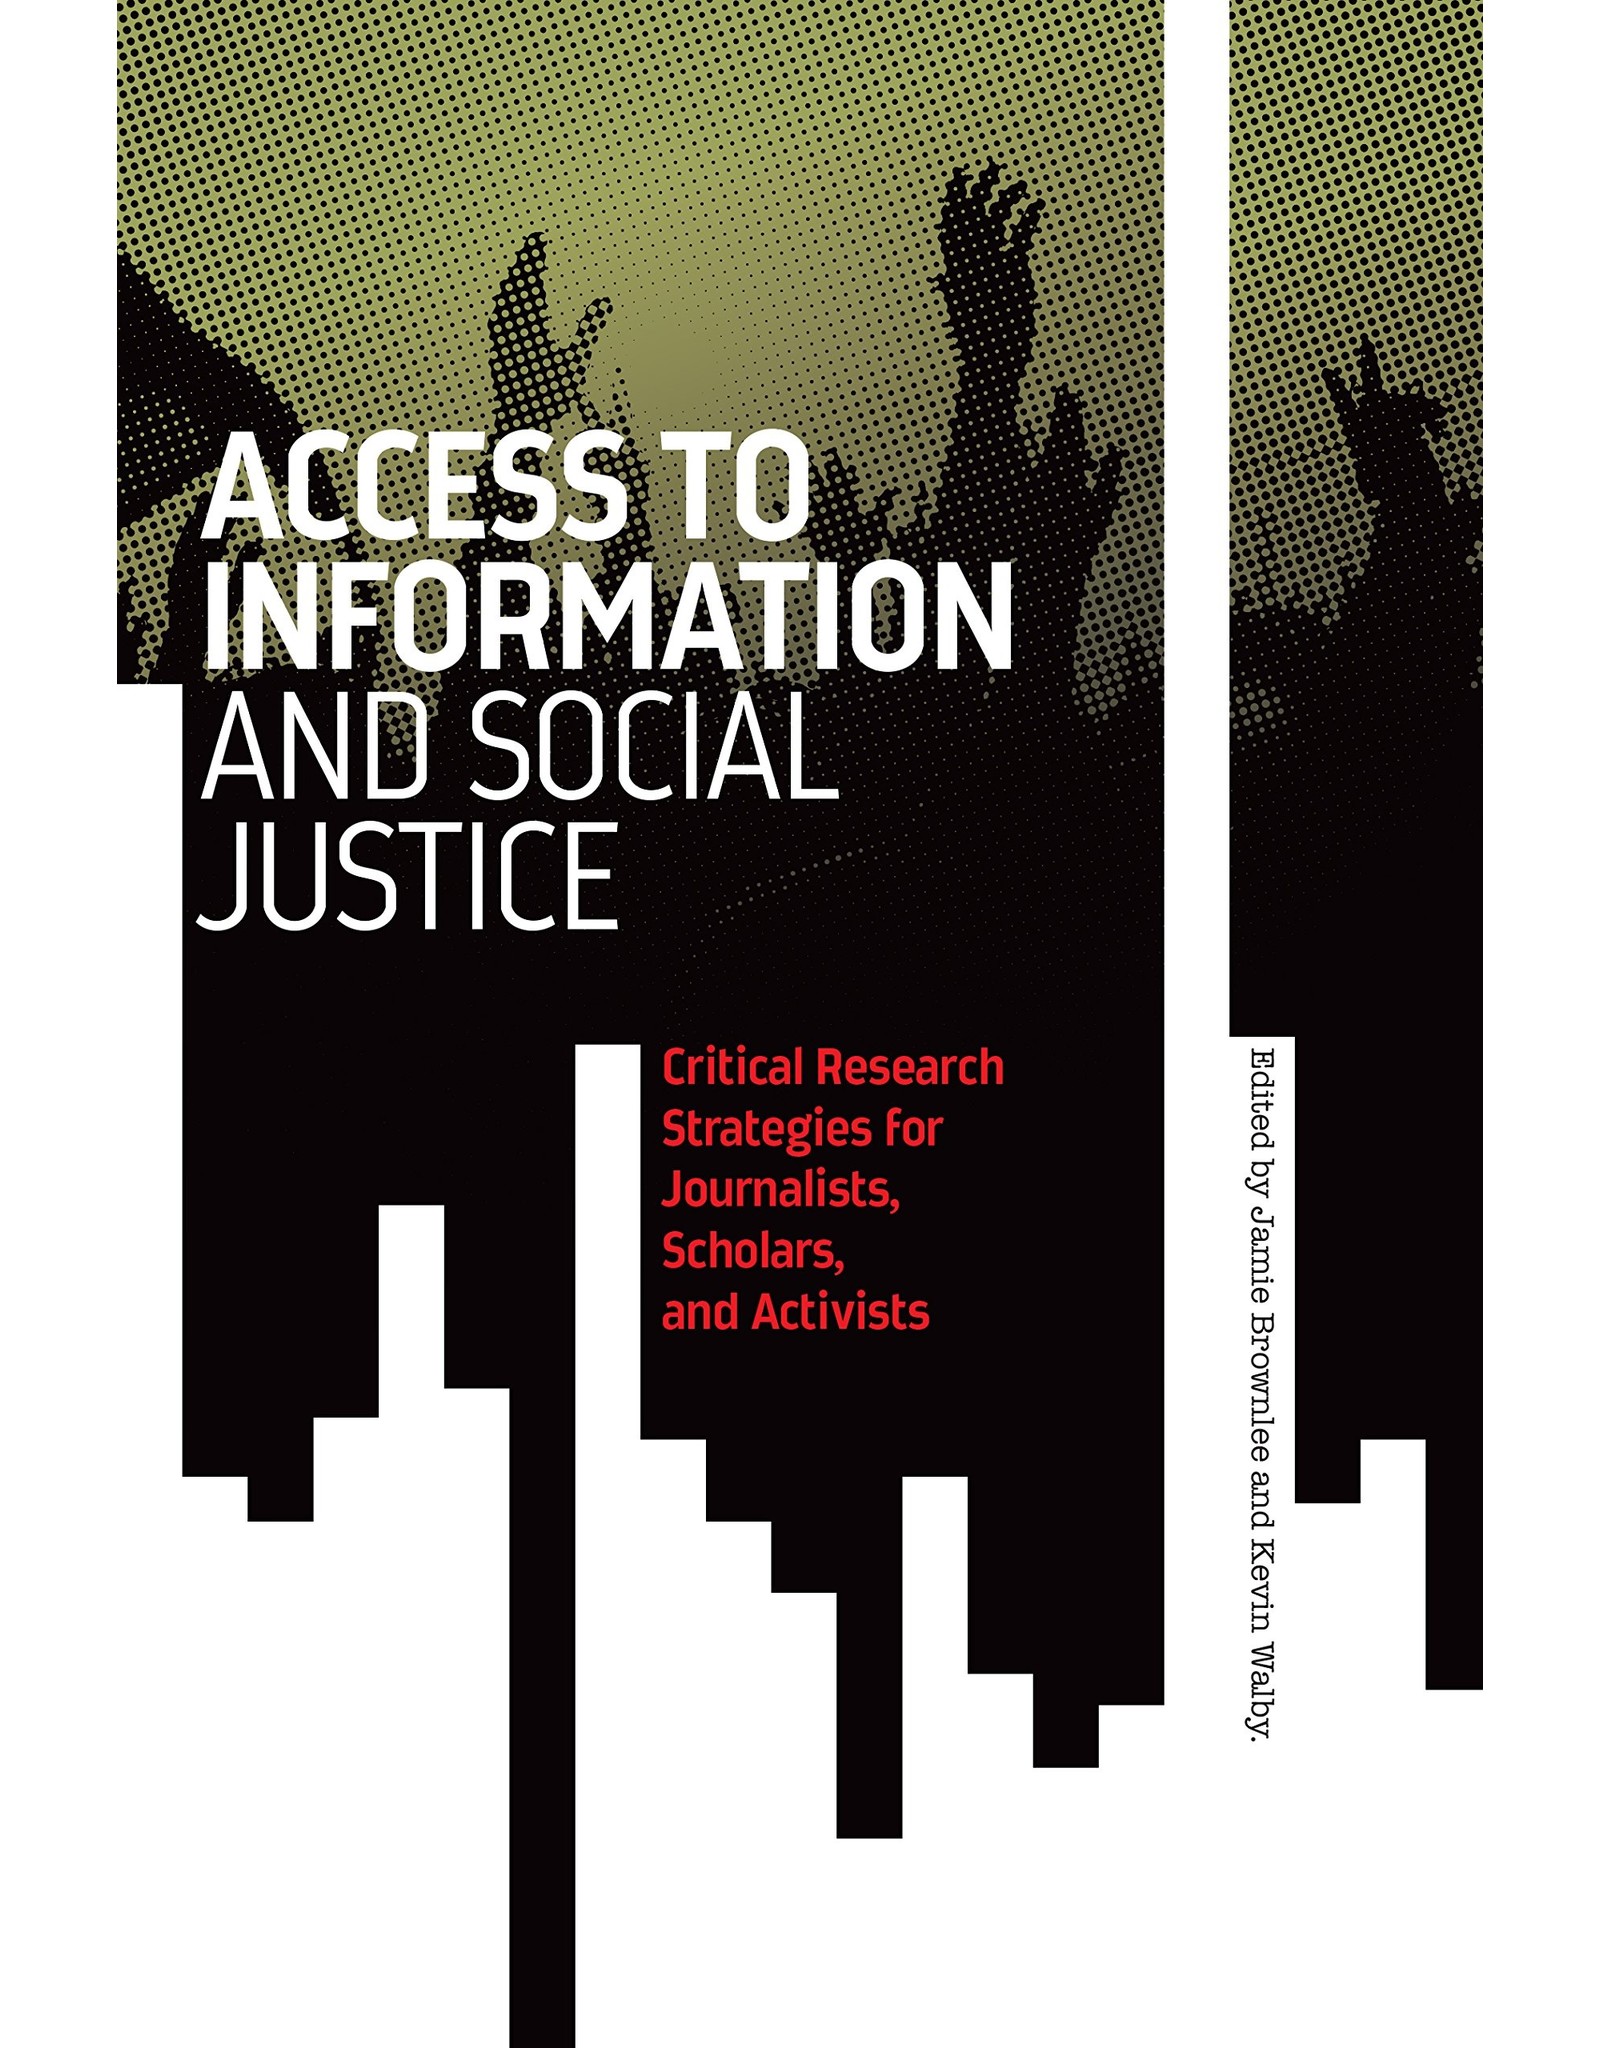 Literature Access to Information and Social Justice: Critical Research Strategies for Journalists, Scholars, and Activists